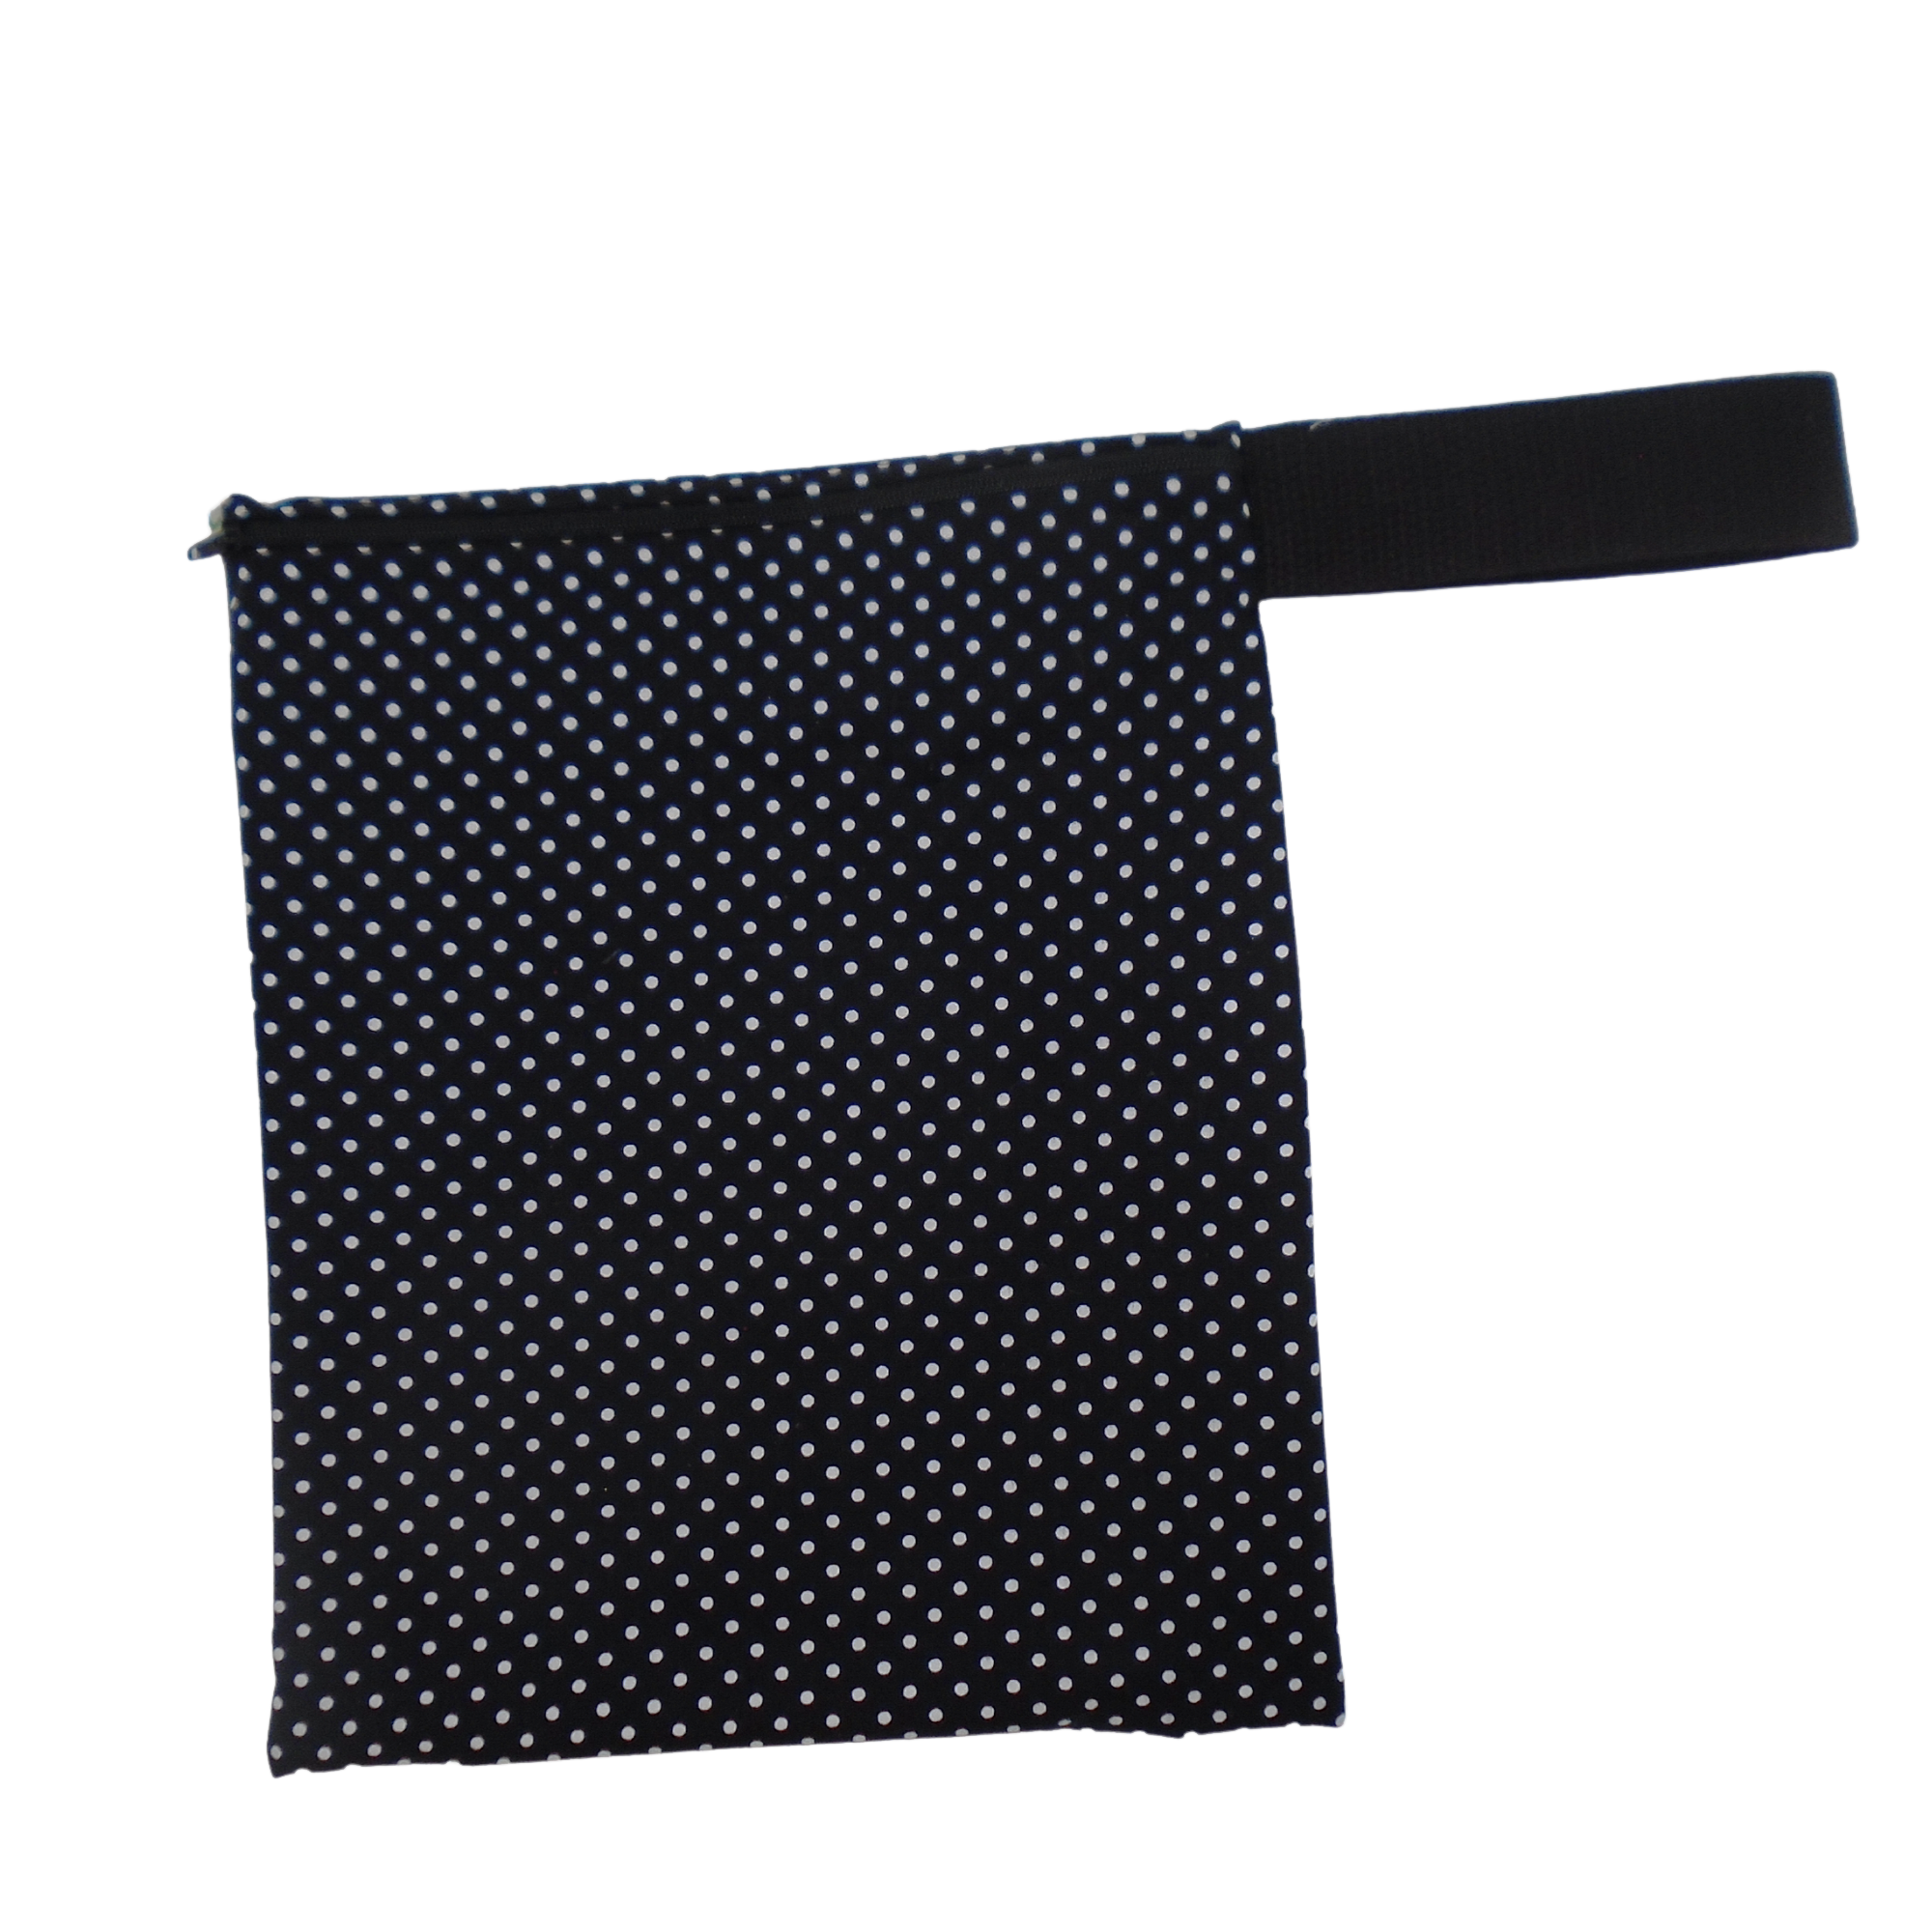 Black Polka Dots -  Handy Poppins Pouch, Waterproof, Washable, Food Safe, Vegan, Lined Zip Bag With Wrist Strap